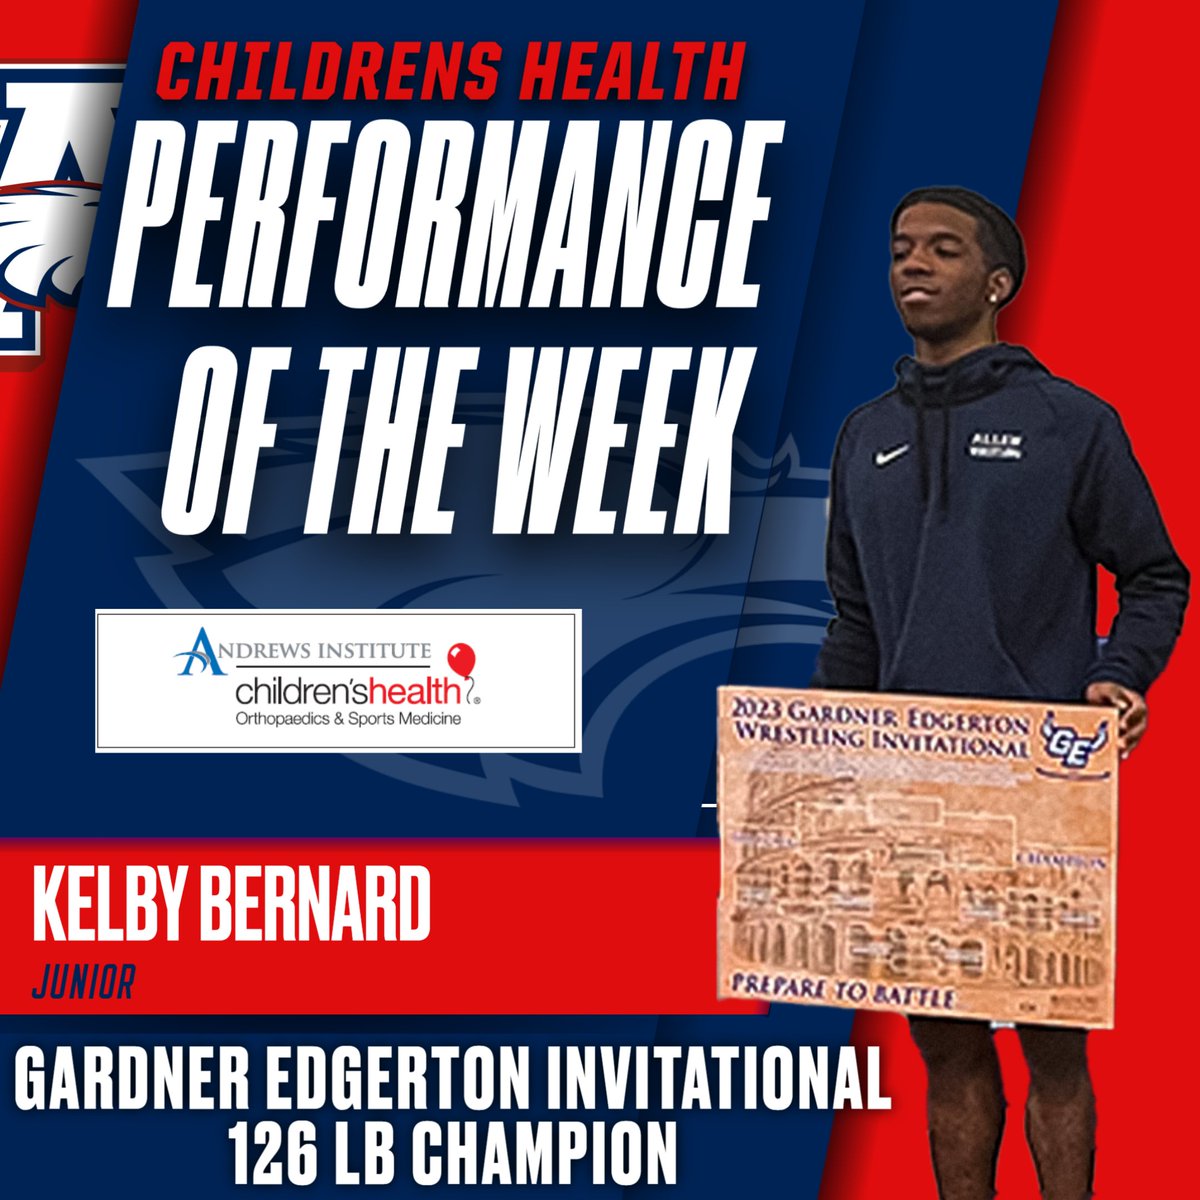 Our Children’s Health Performer of the Week for last week was junior Kelby Bernard! He defeated a 2x All-American & State Champion 14-6 to win the 126lb title at the Gardner Edgerton Invitational! @Allenwrestling @childrens @Allen_ISD